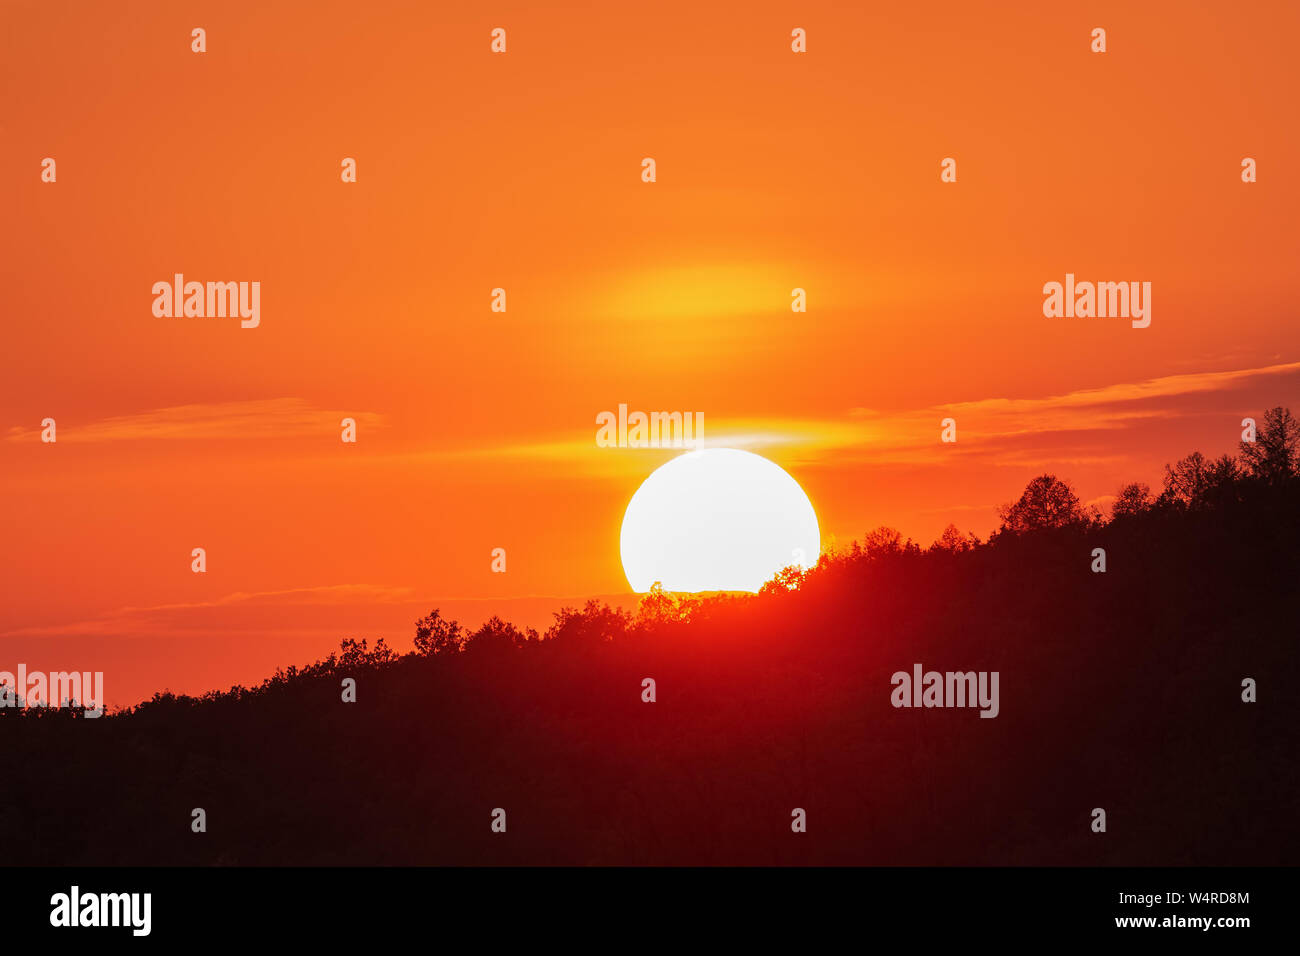 Colorful orange sky with sun at down, romantic background Stock Photo